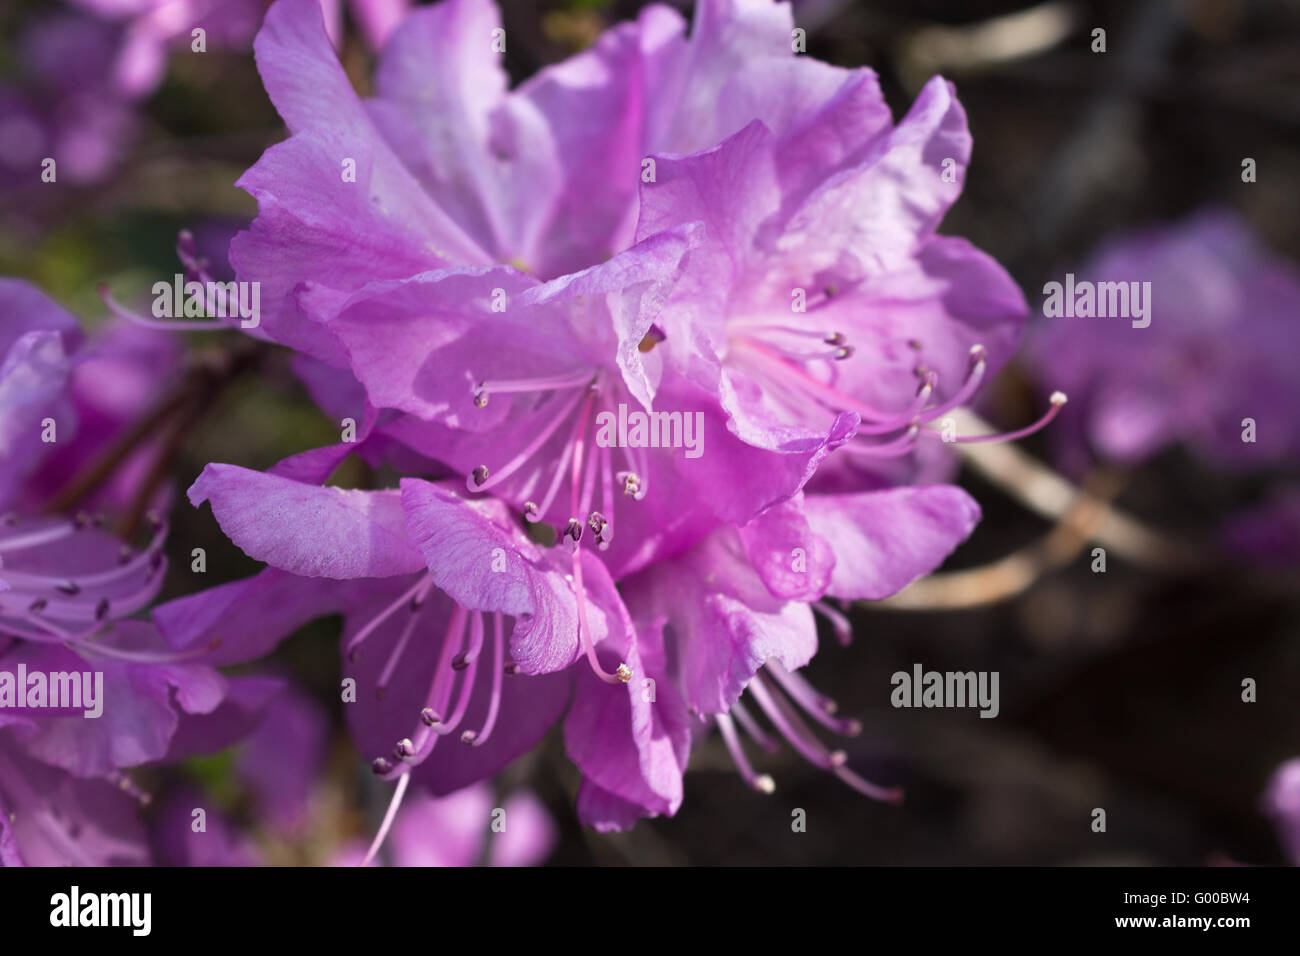 an open flower of lilac rhododendron closeup Stock Photo